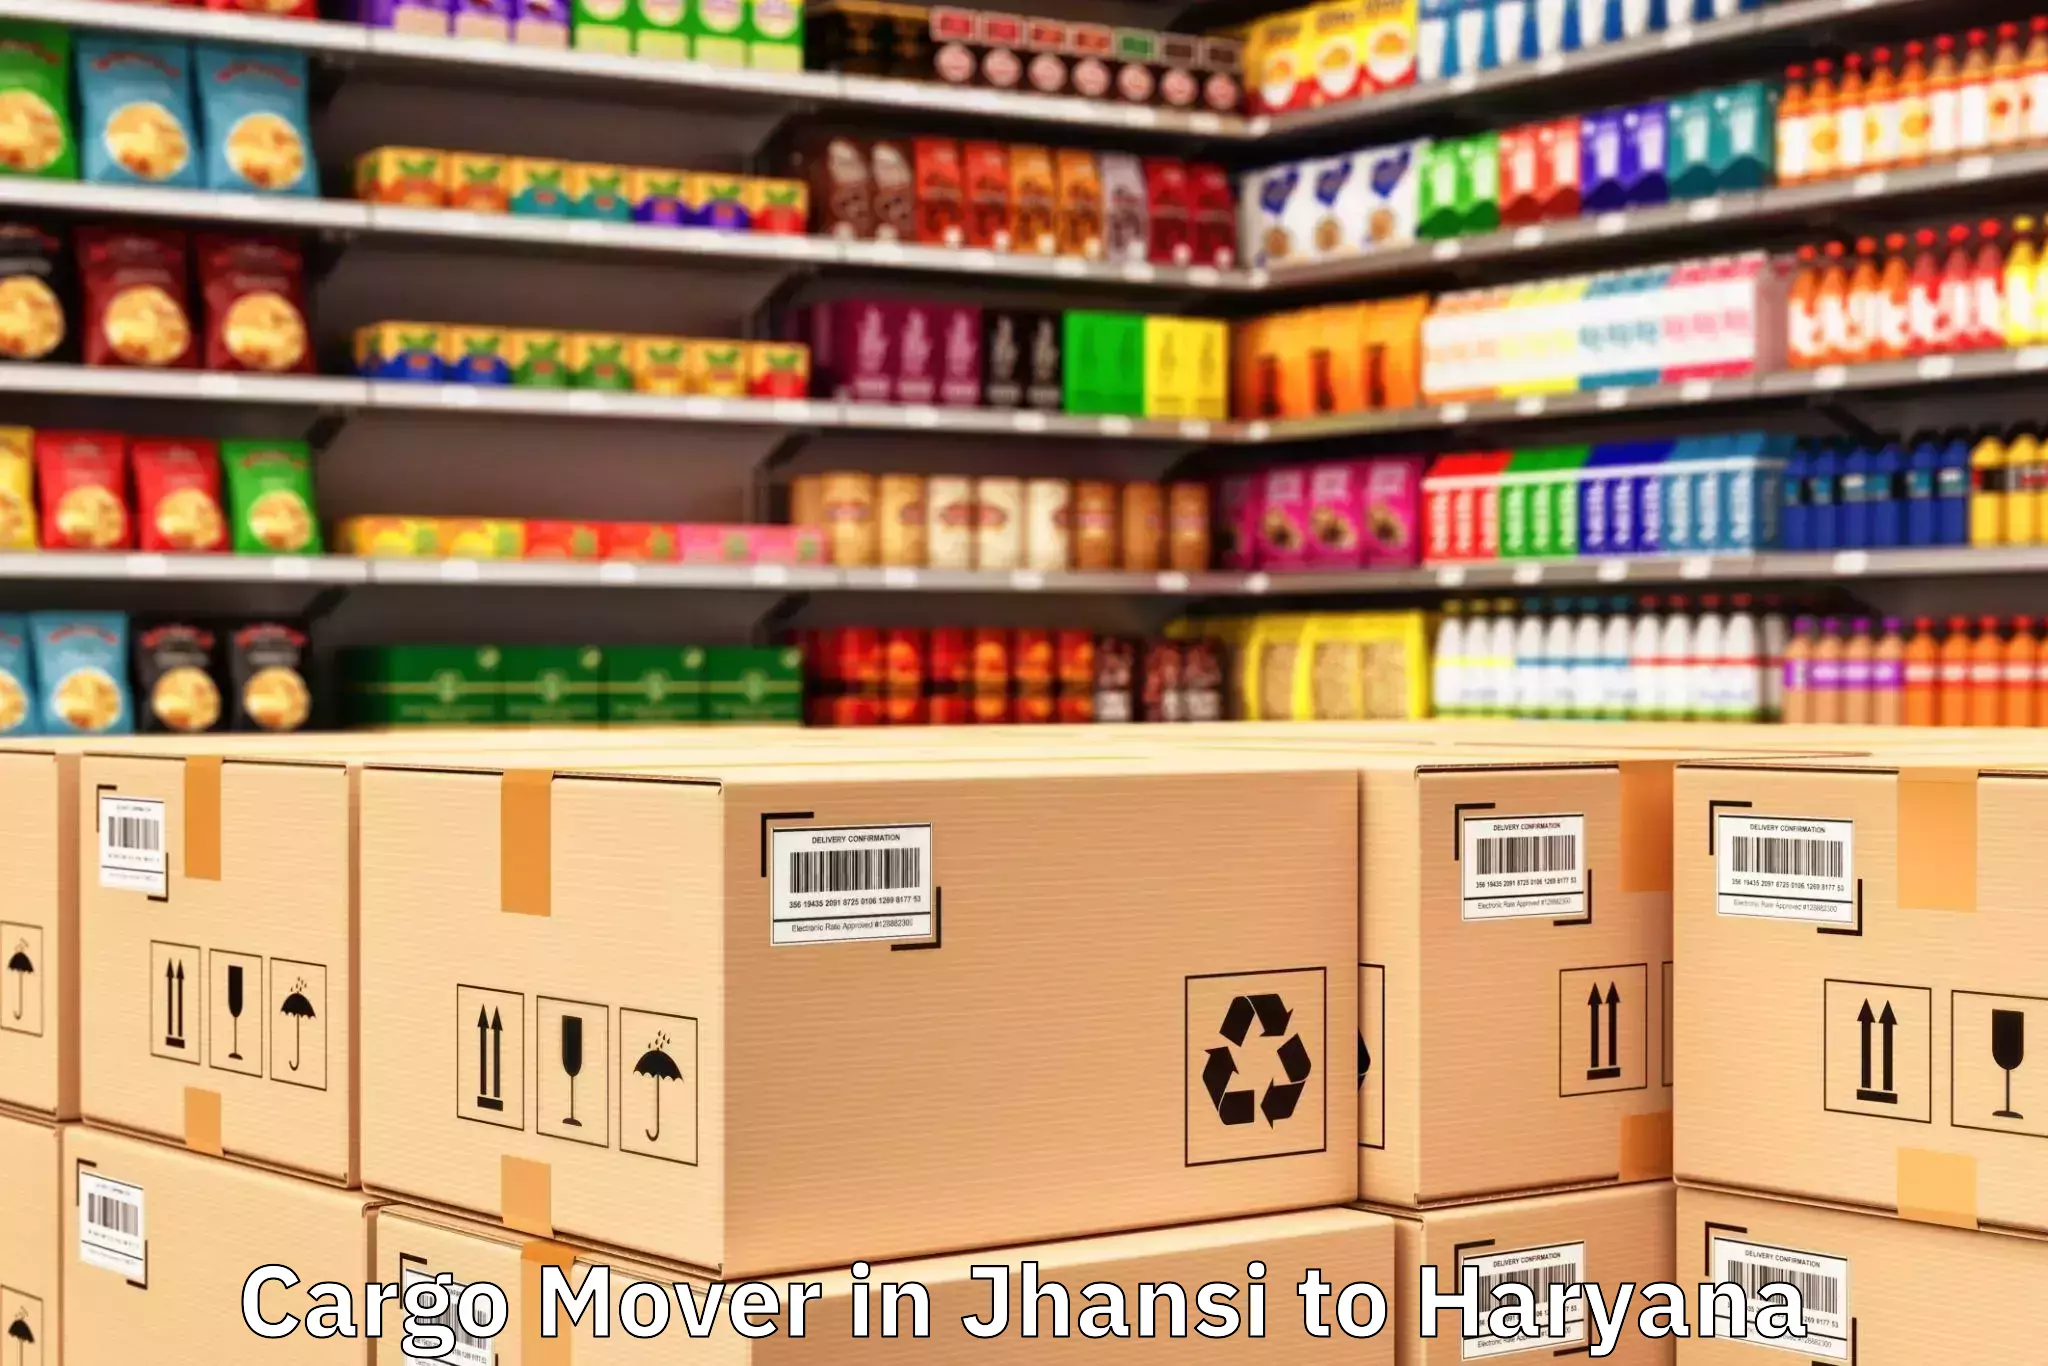 Professional Jhansi to Jind Cargo Mover